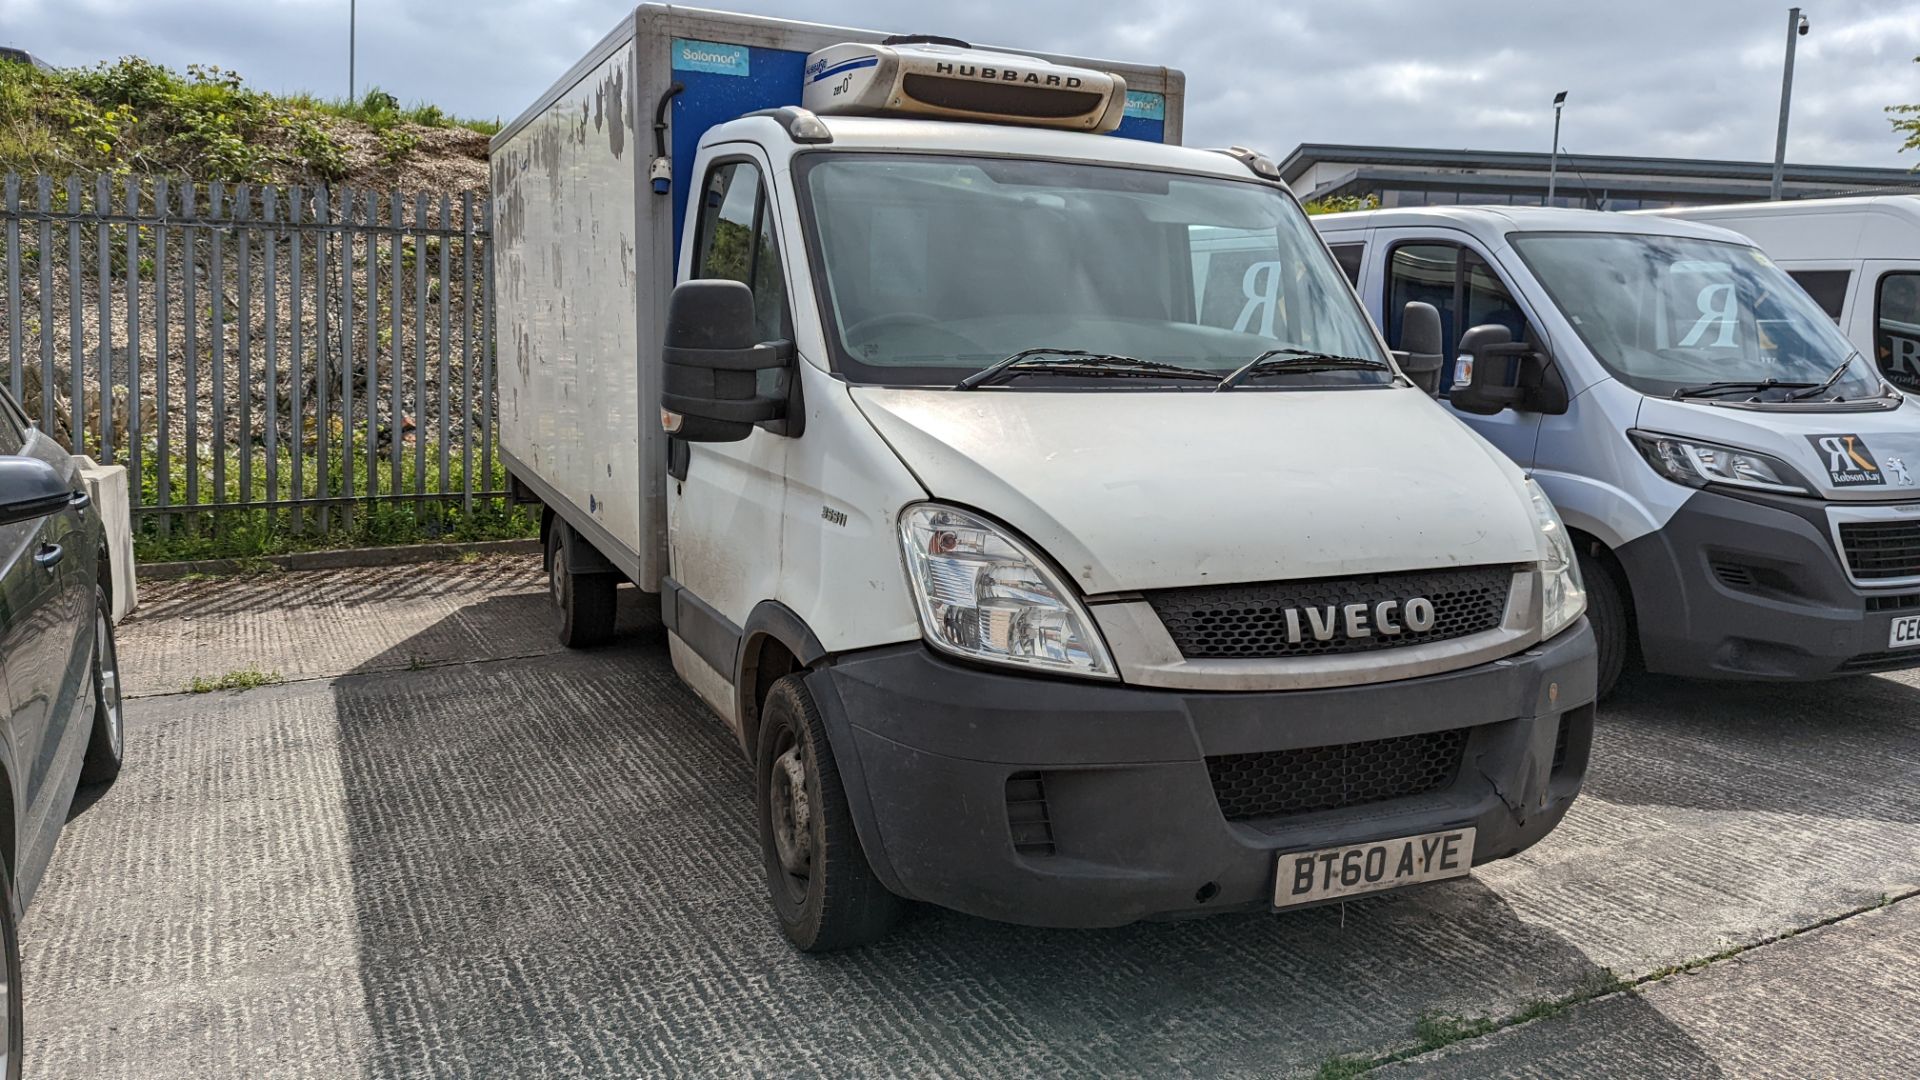 BT60 AYE Iveco Daily 35S11 MWB refrigerated box van with multiple compartments (ex-Tesco), 5 speed a